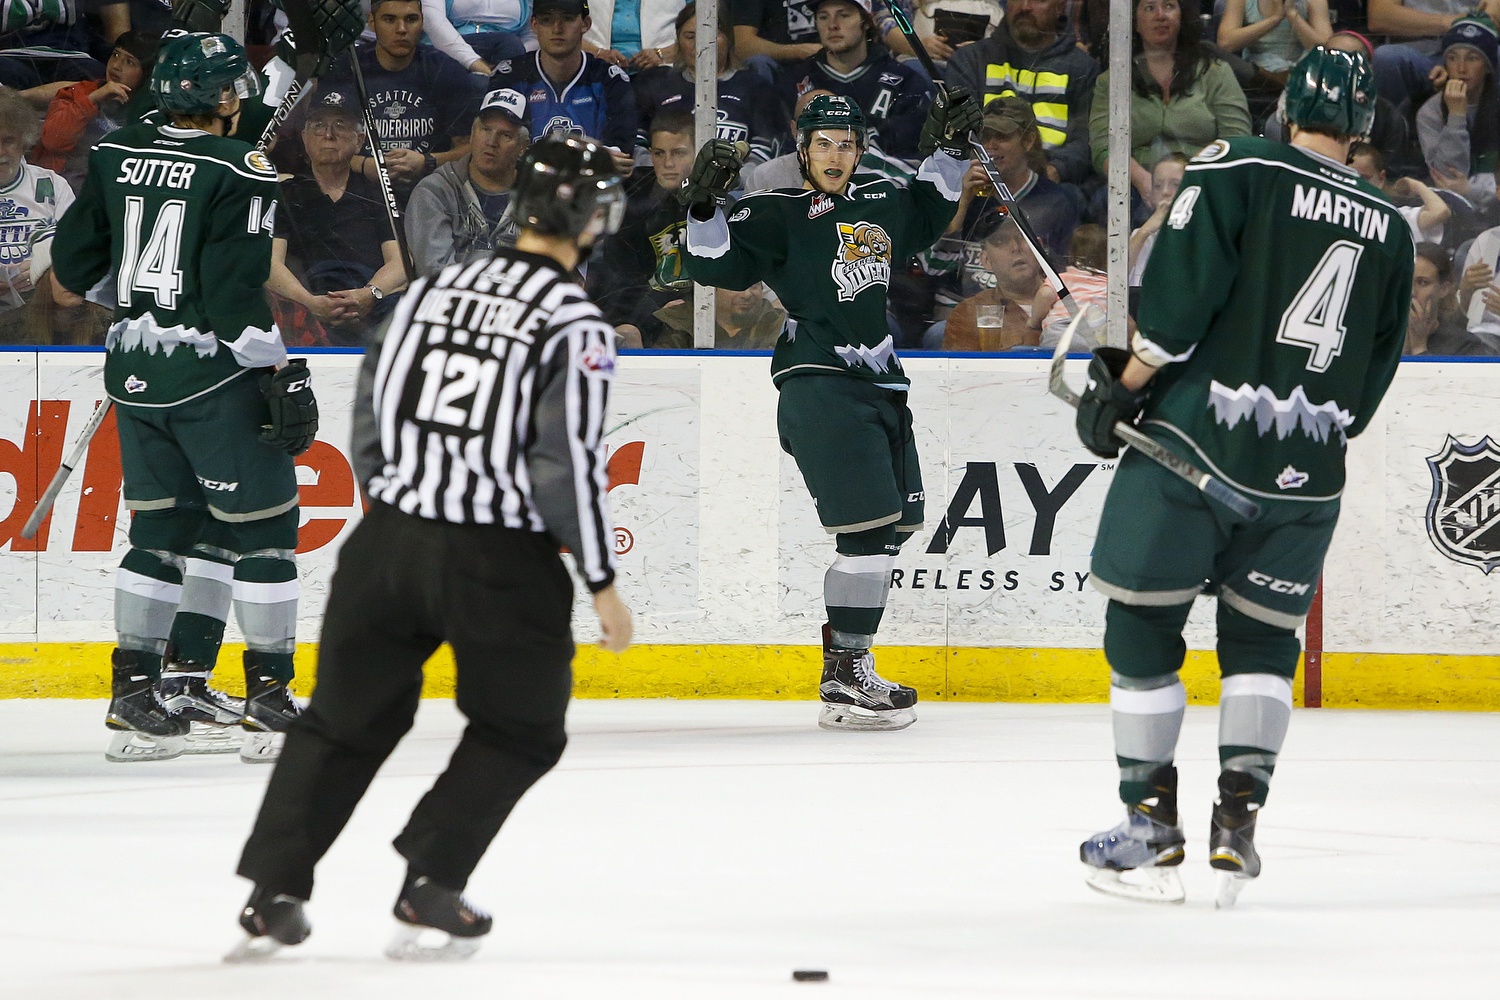 Final thoughts as Everett Silvertips bow out to Seattle Thunderbirds